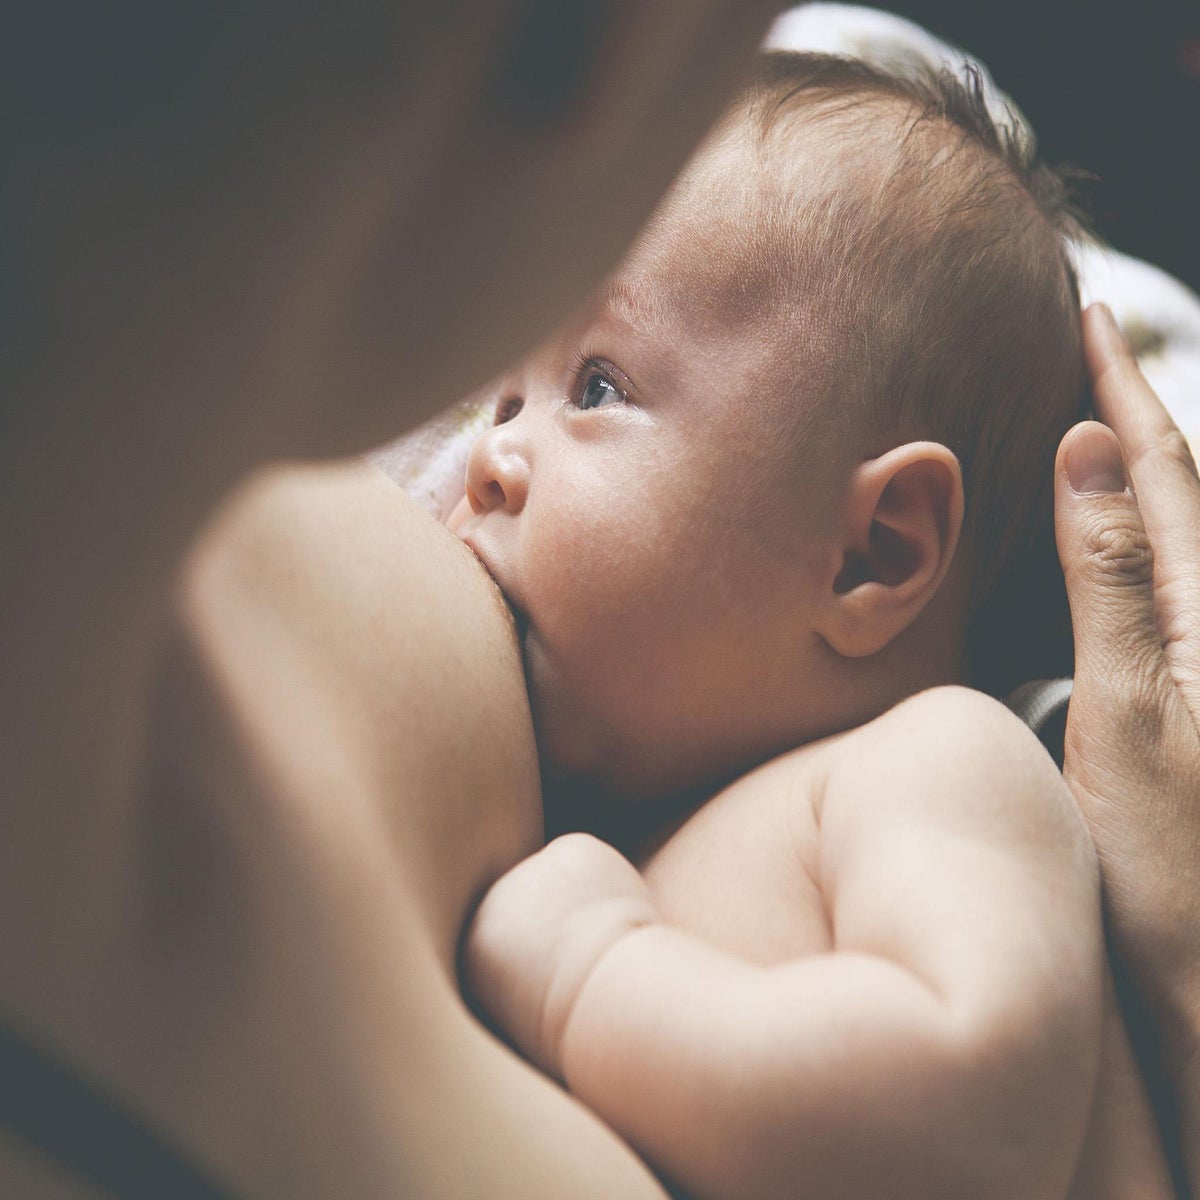 Breastfeeding doesn't make children more intelligent in the long term,  finds study, The Independent